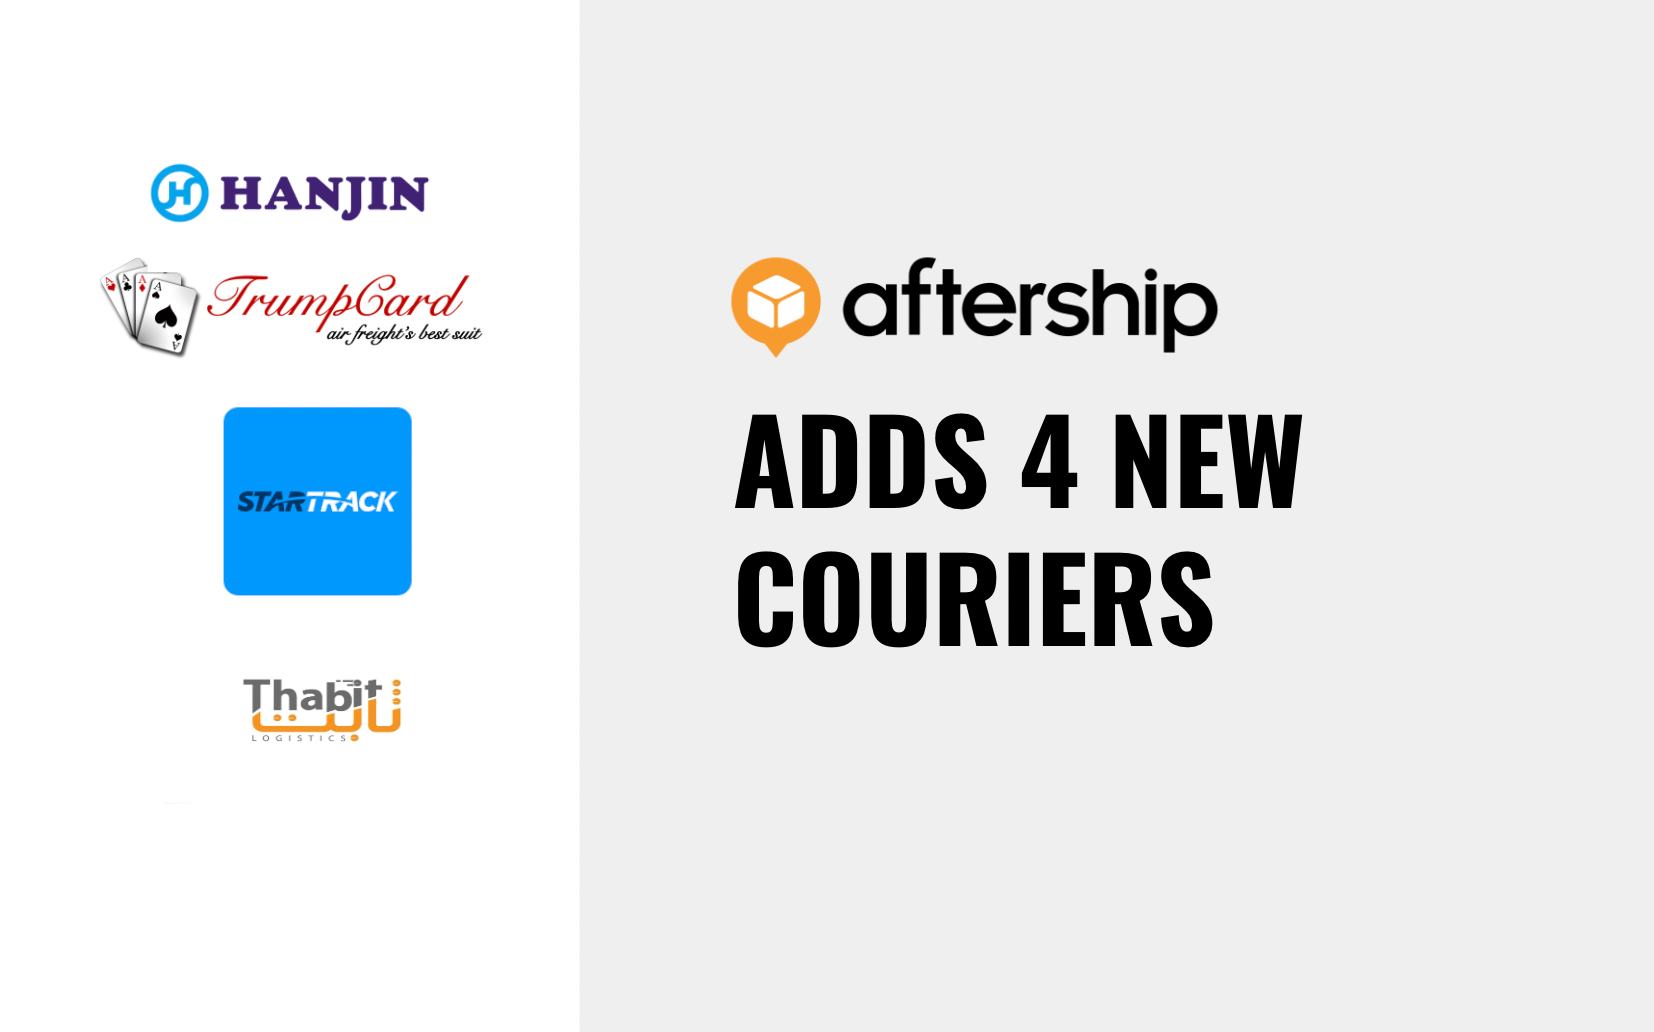 AfterShip adds 4 new couriers this week (2nd Mar 2021 to 8th Mar 2021)